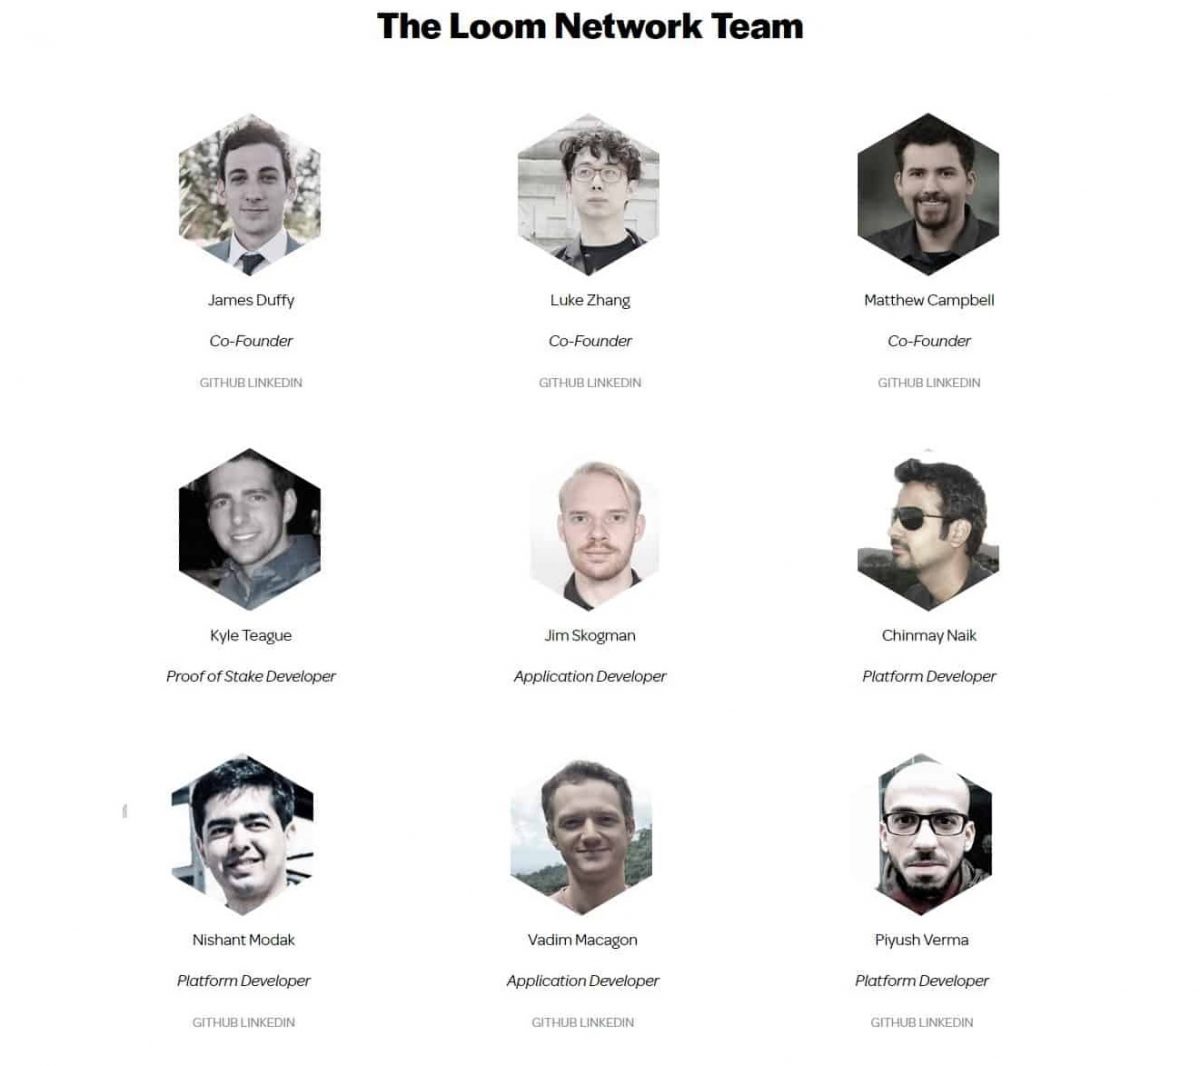 The Loom Network Team Outlined in Image with each founder's profile image